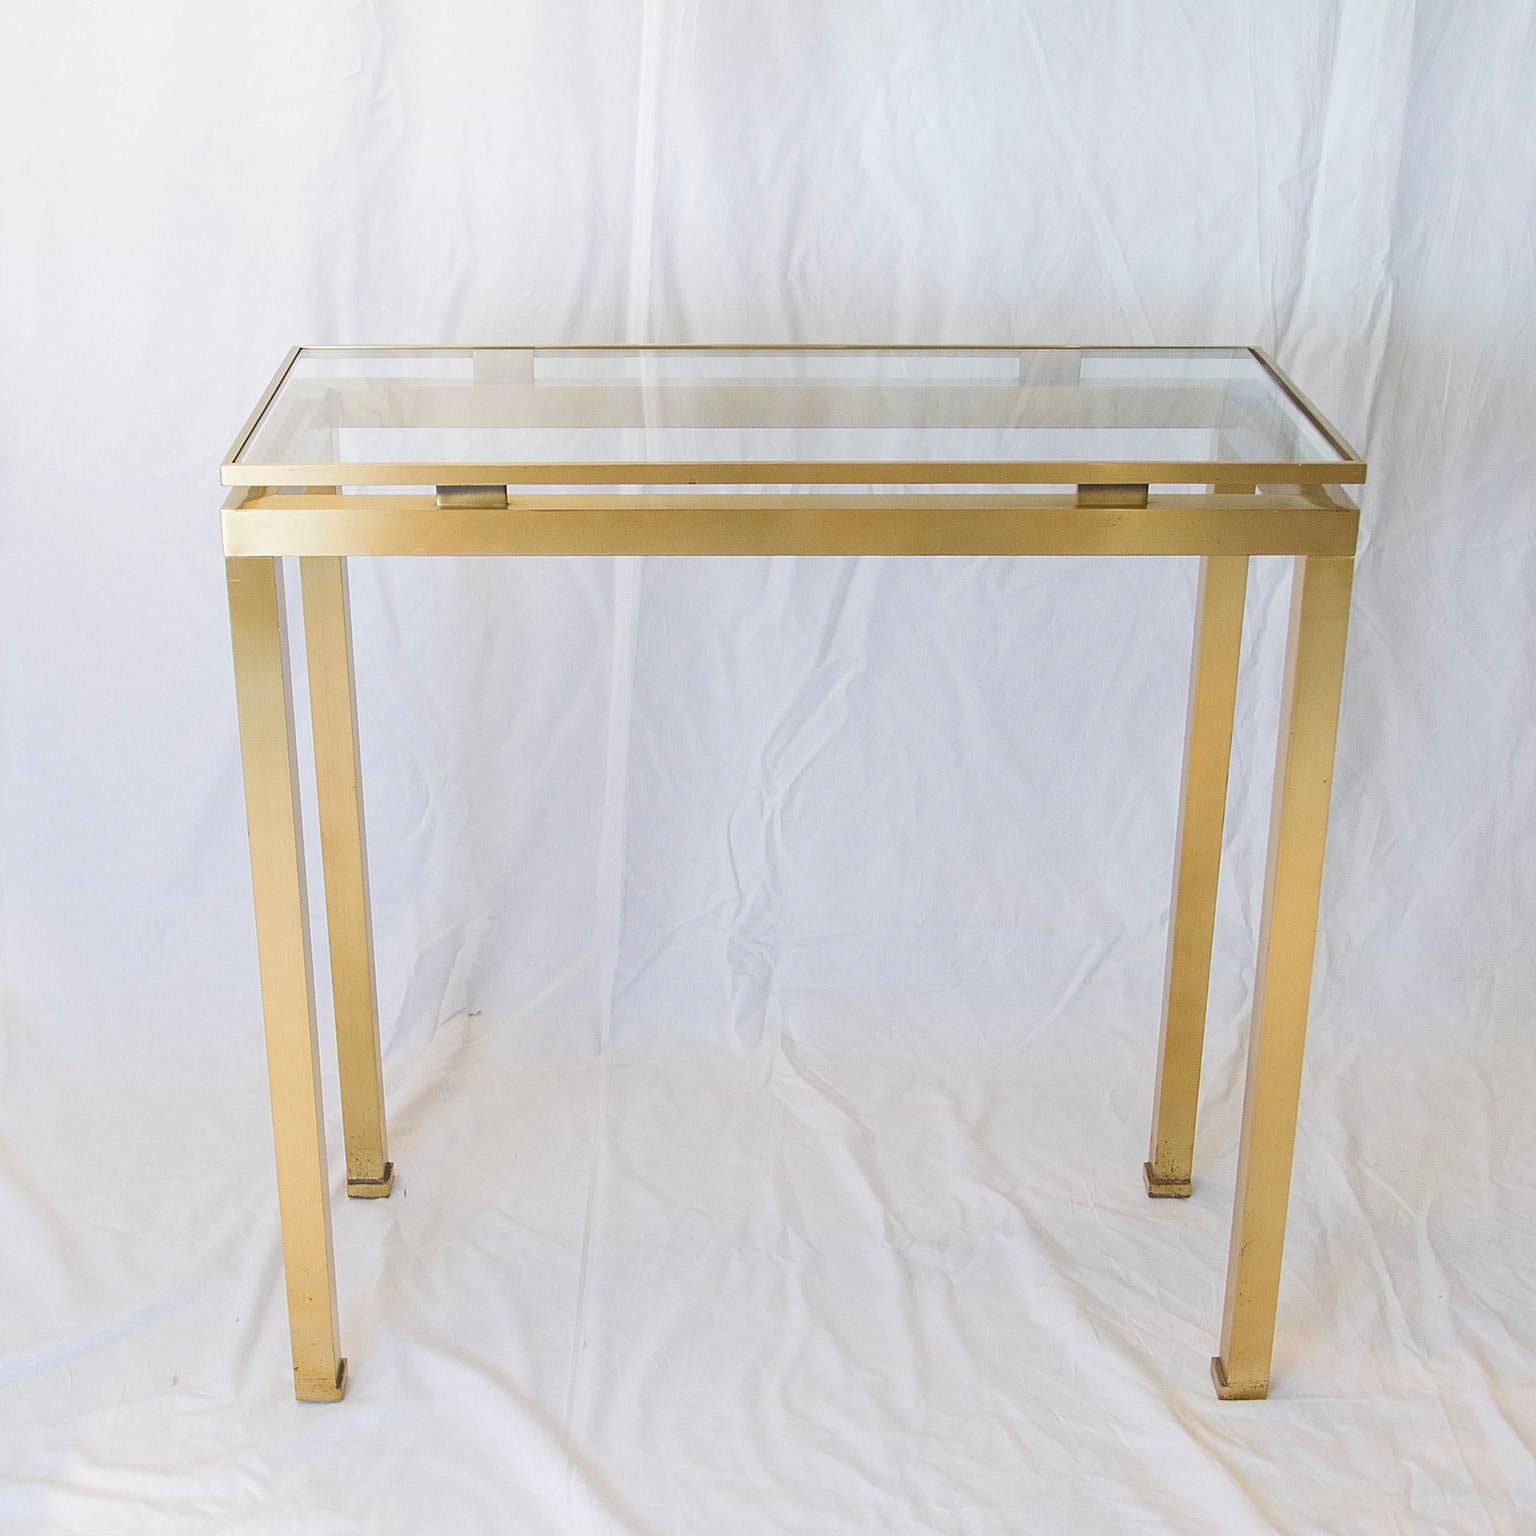 Golden brushed steel console with glass top by Guy Lefevre for Maison Jansen.